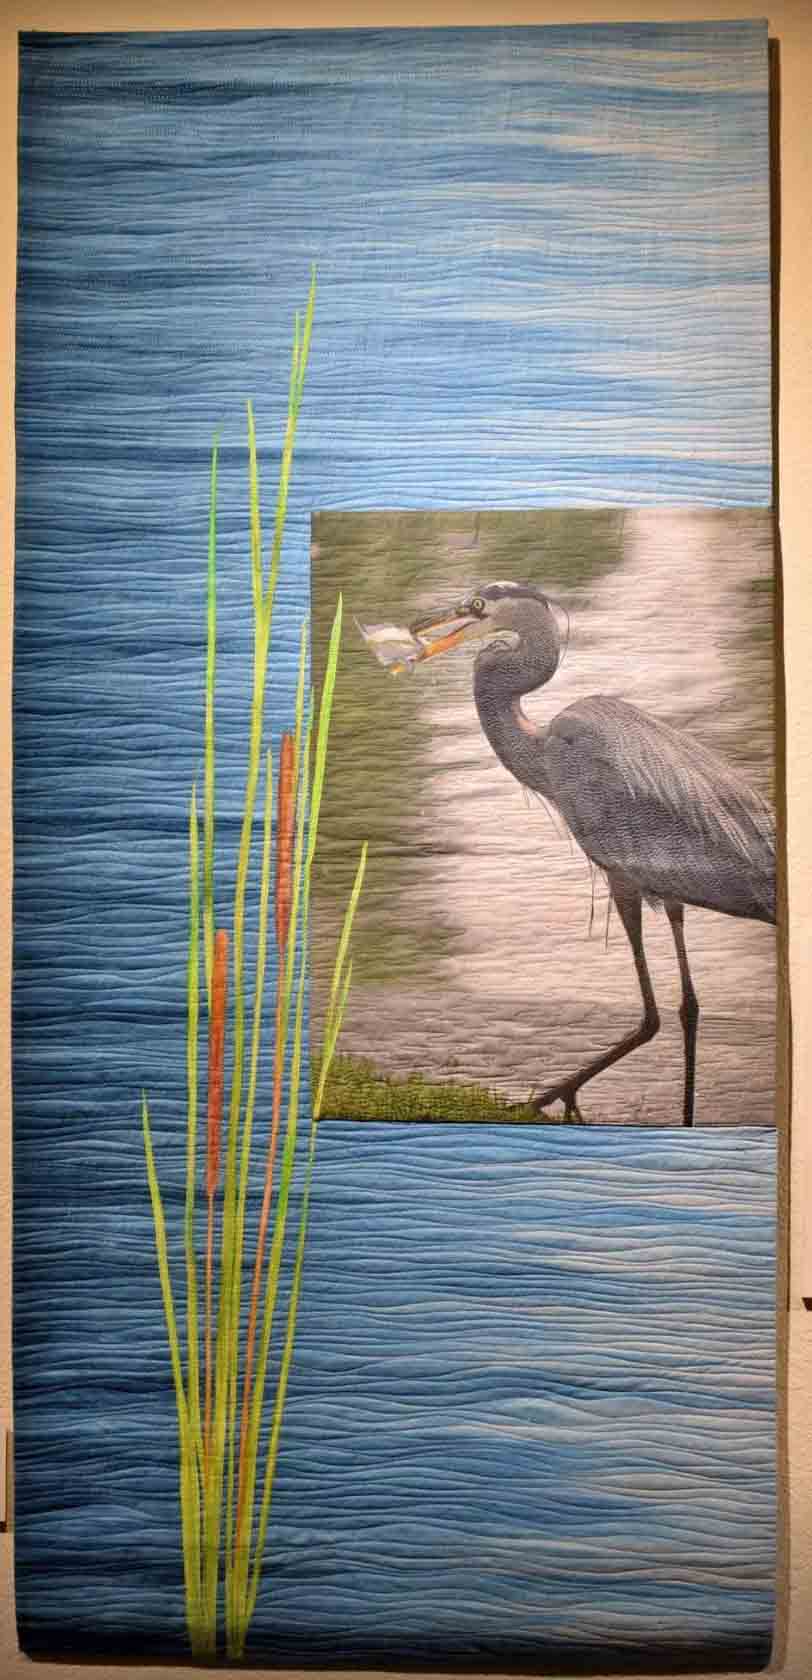 vertically oriented art quilt with water catails plant and heron